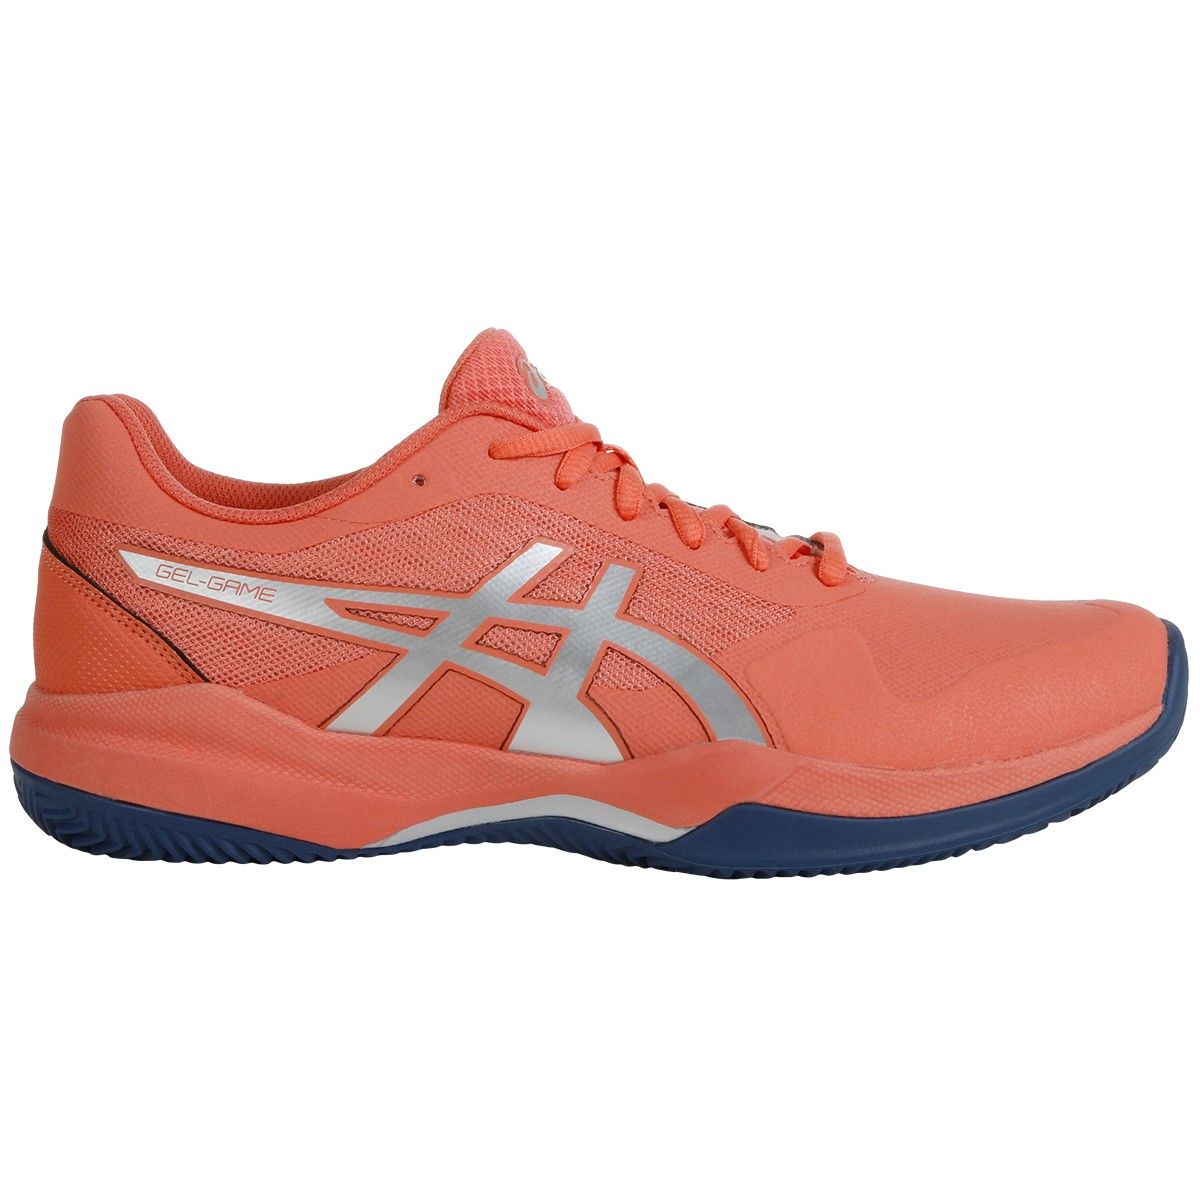 Asics Gel Game 7 Clay Women's Tennis Shoes 1042A038-704